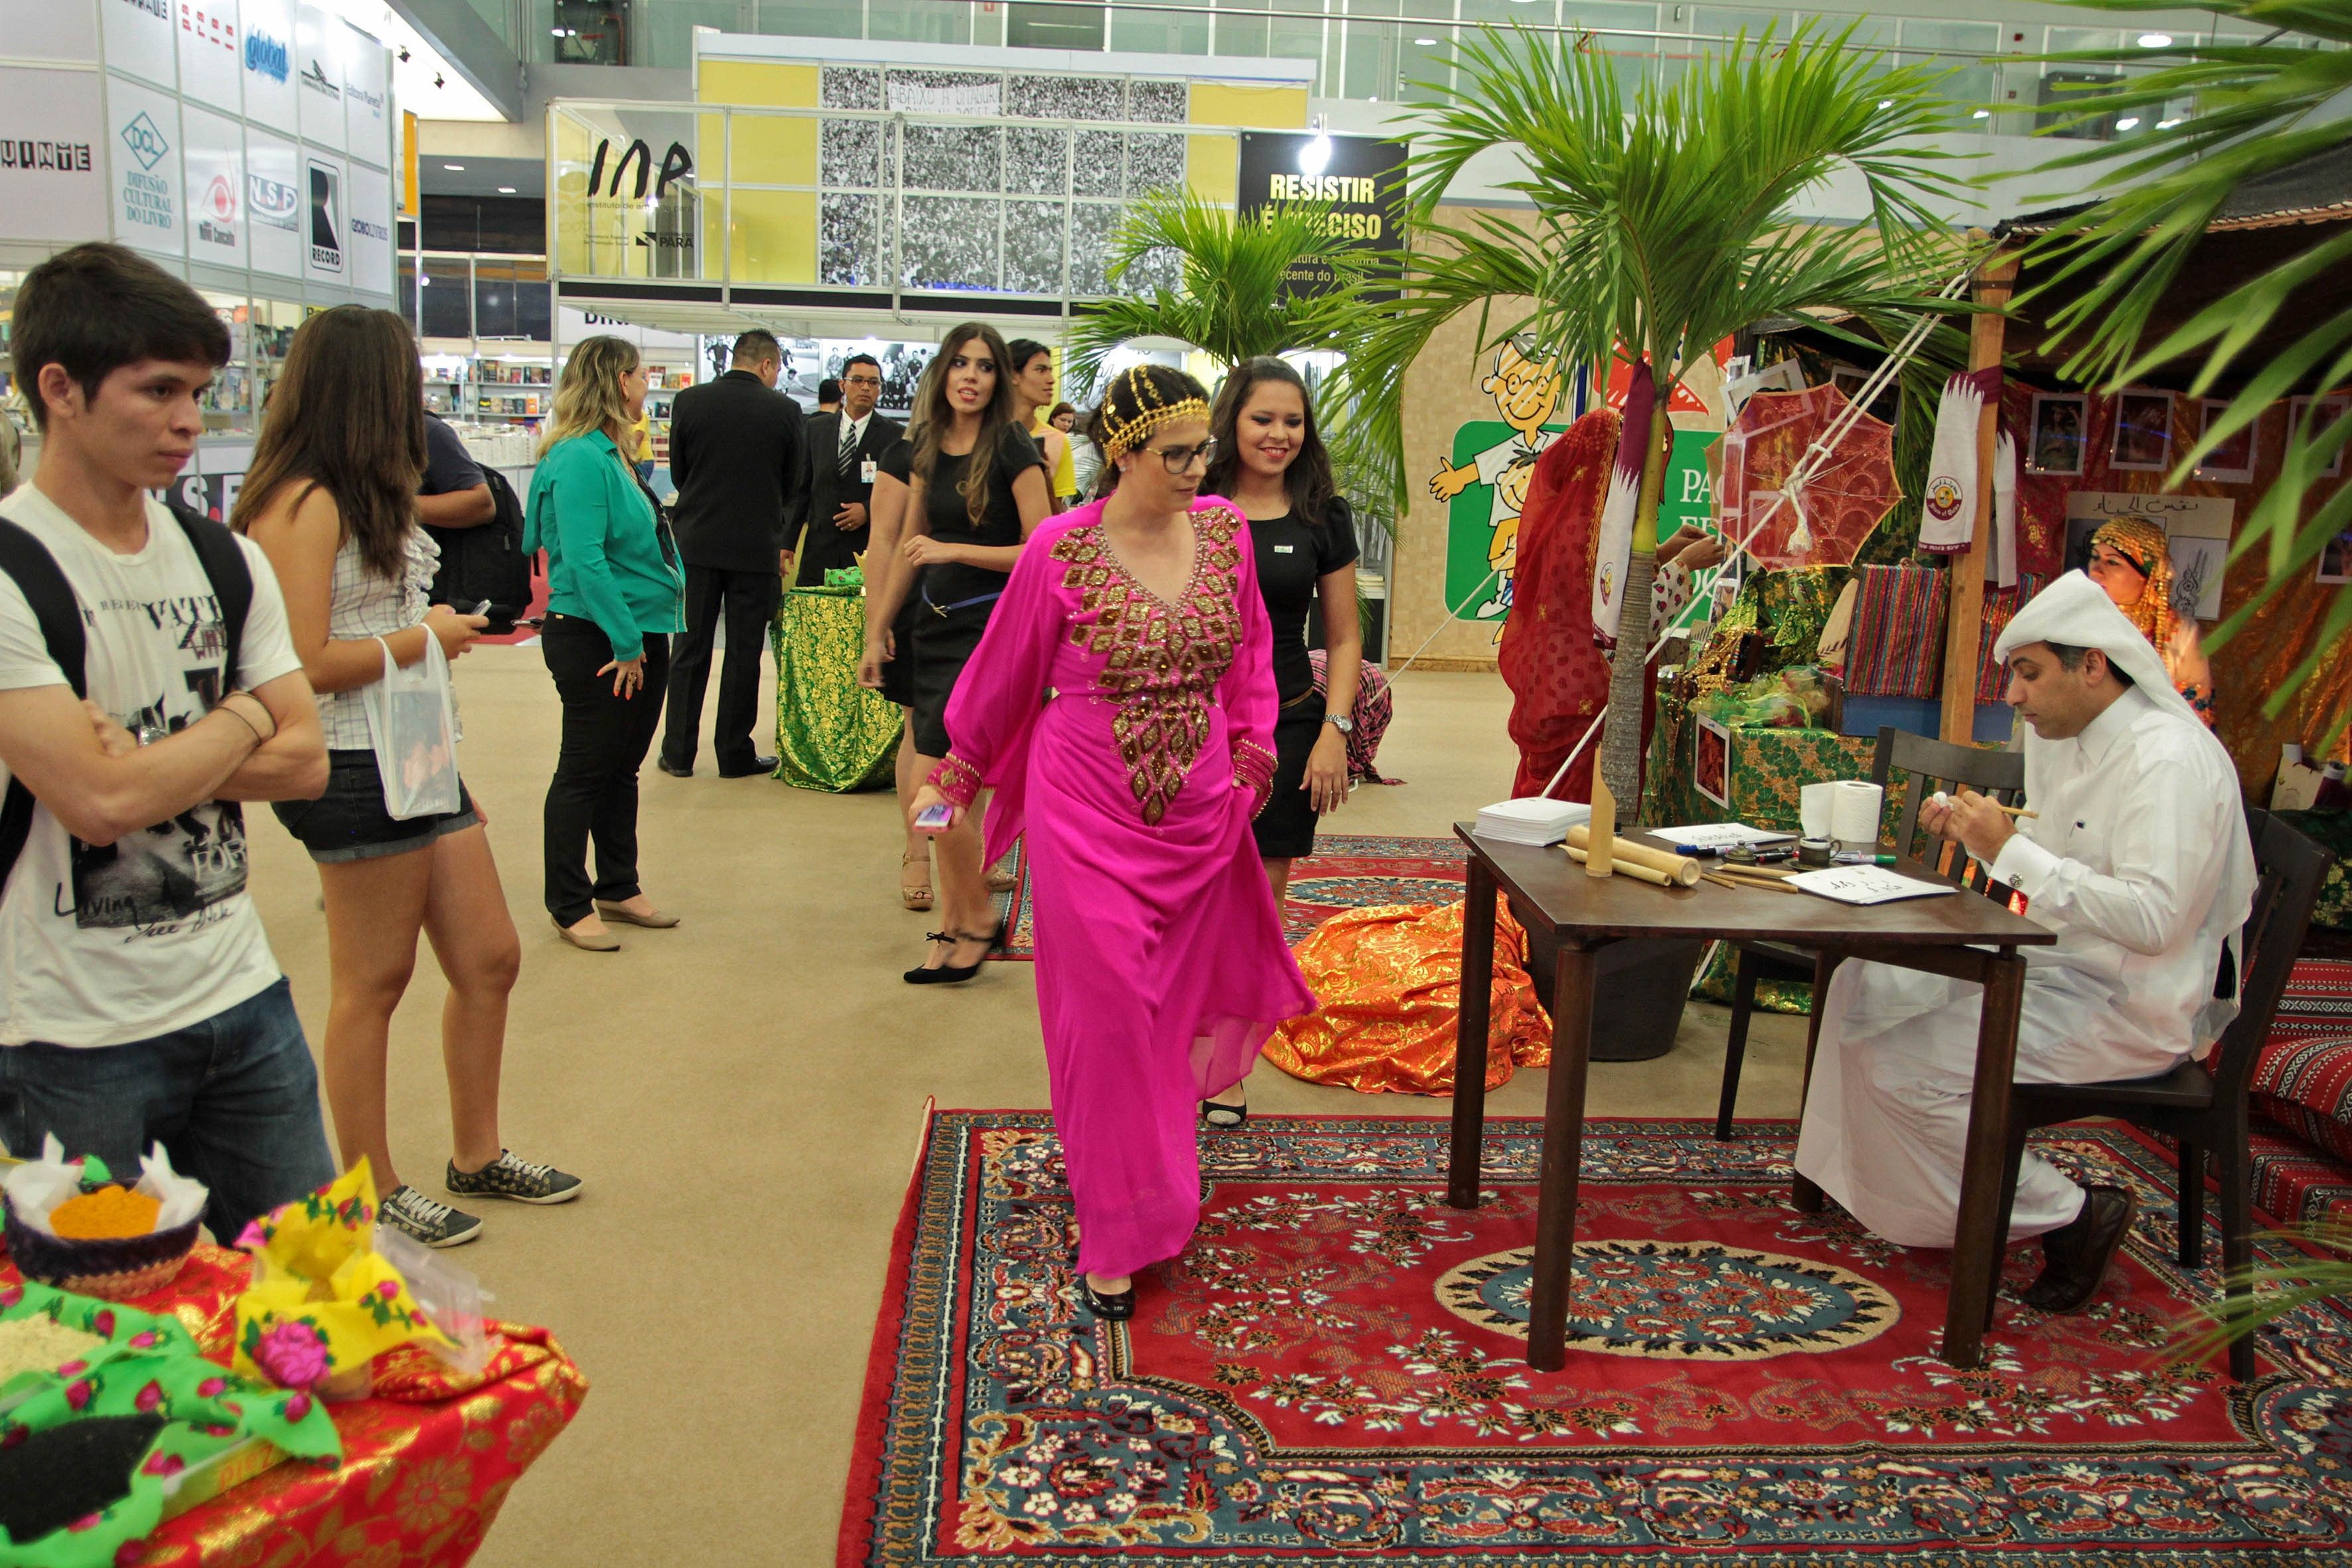 The Pan-Amazon book fair during Qatar-Brazil 2014, with an author sitting at a table and groups of people walking by.